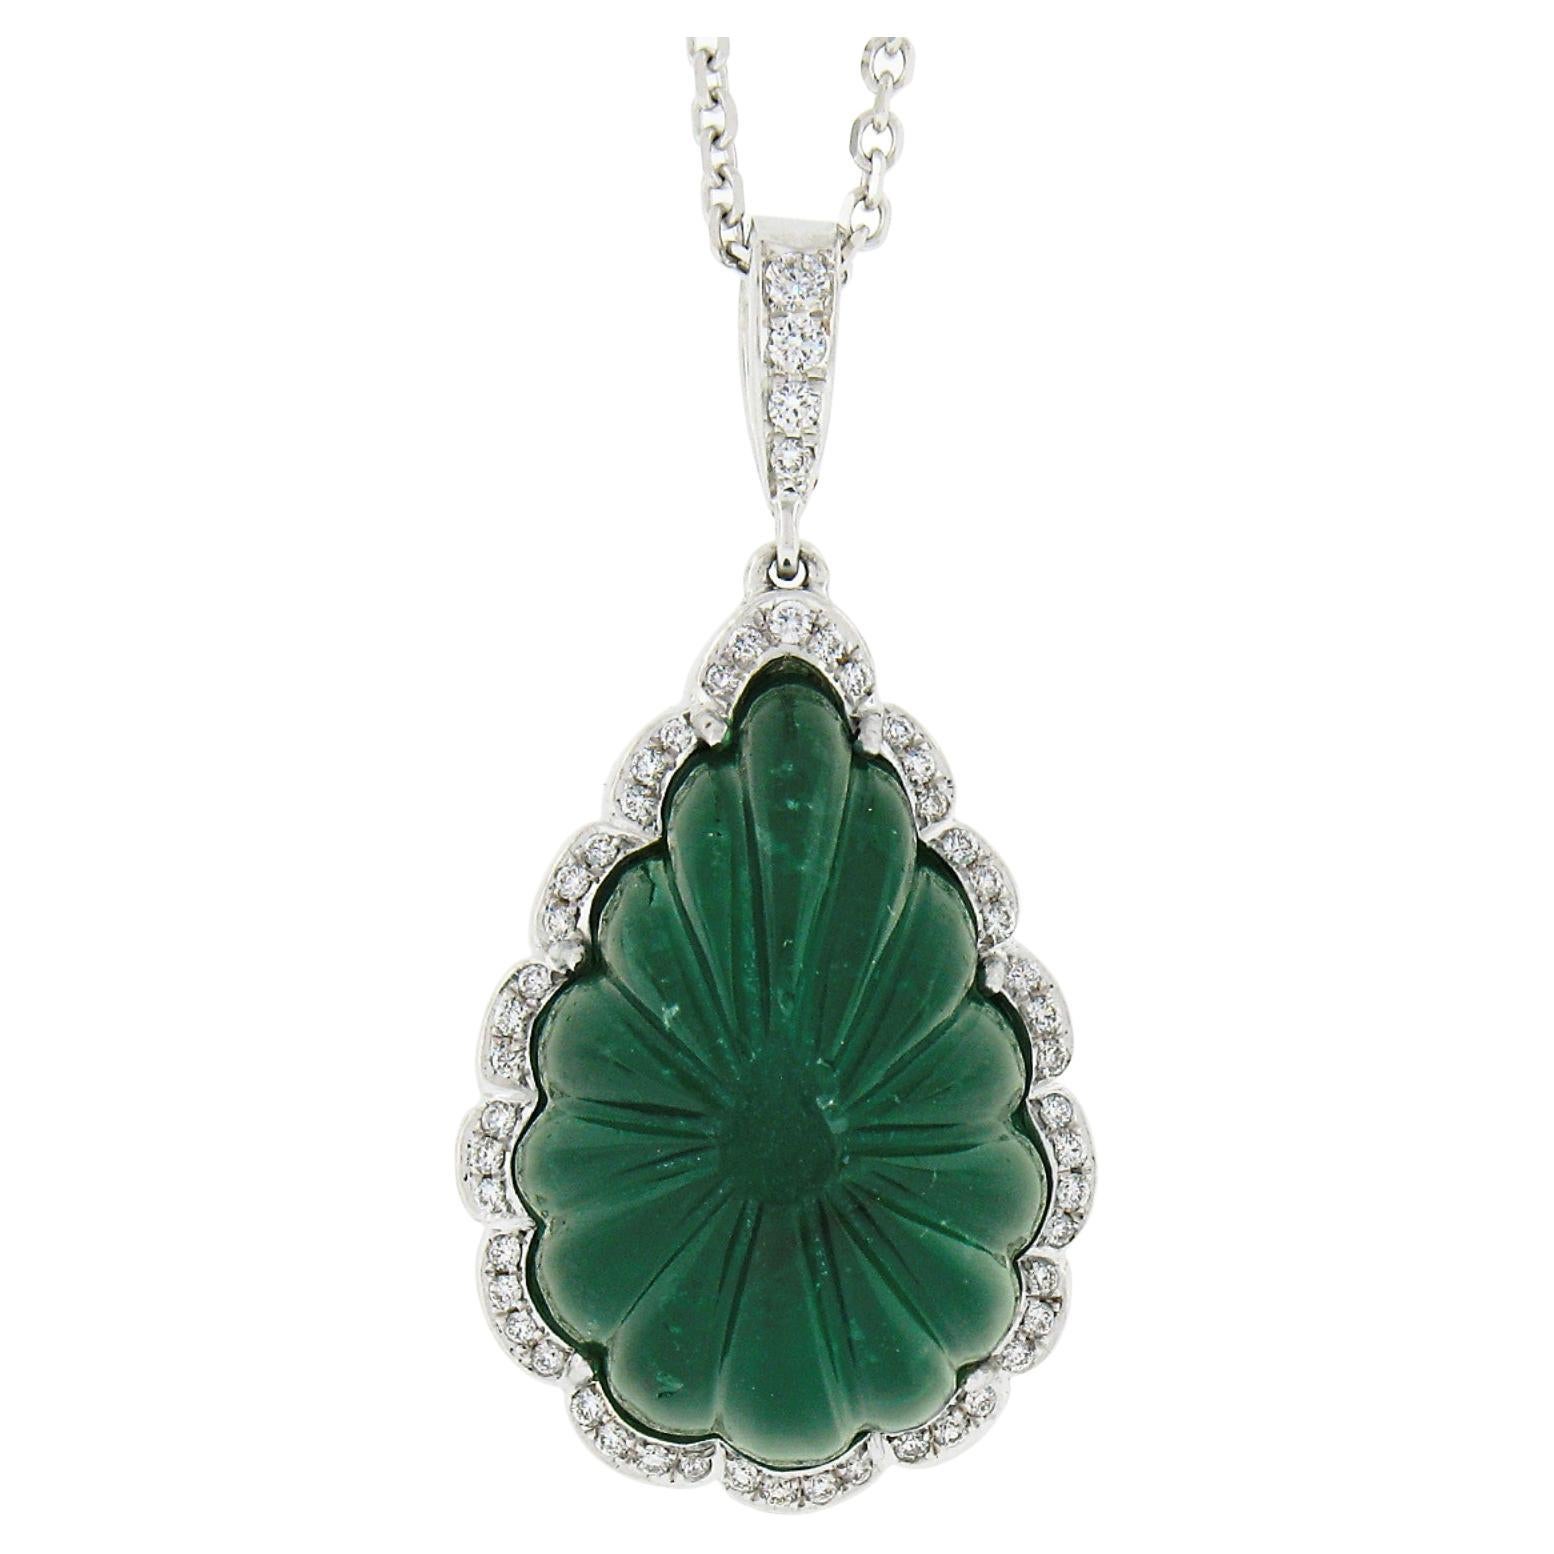 New 18k Gold GIA Carved Pear Cabochon Emerald Diamond Scalloped Pendant & Chain For Sale